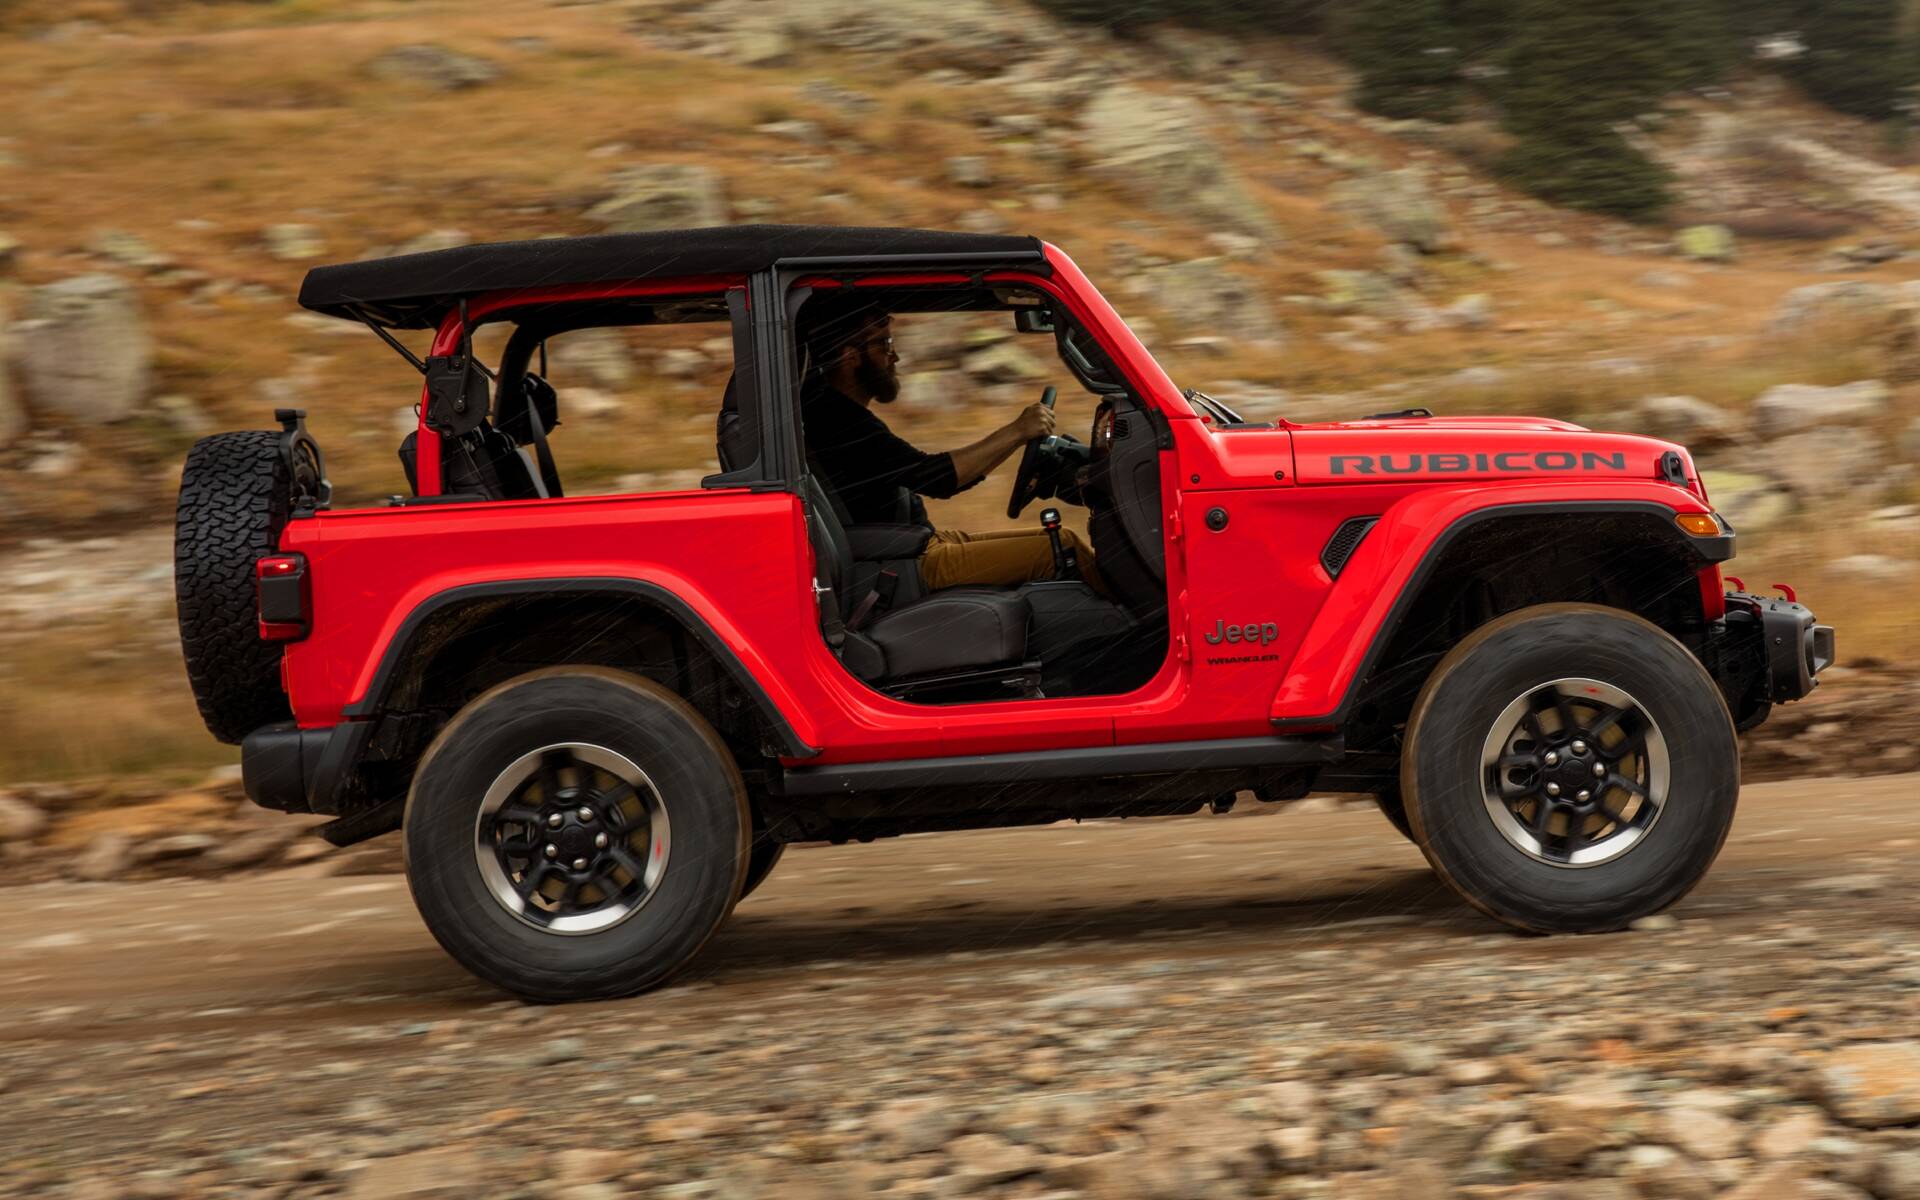 How Do Removable Doors Work On the Jeep Wrangler? - The Car Guide